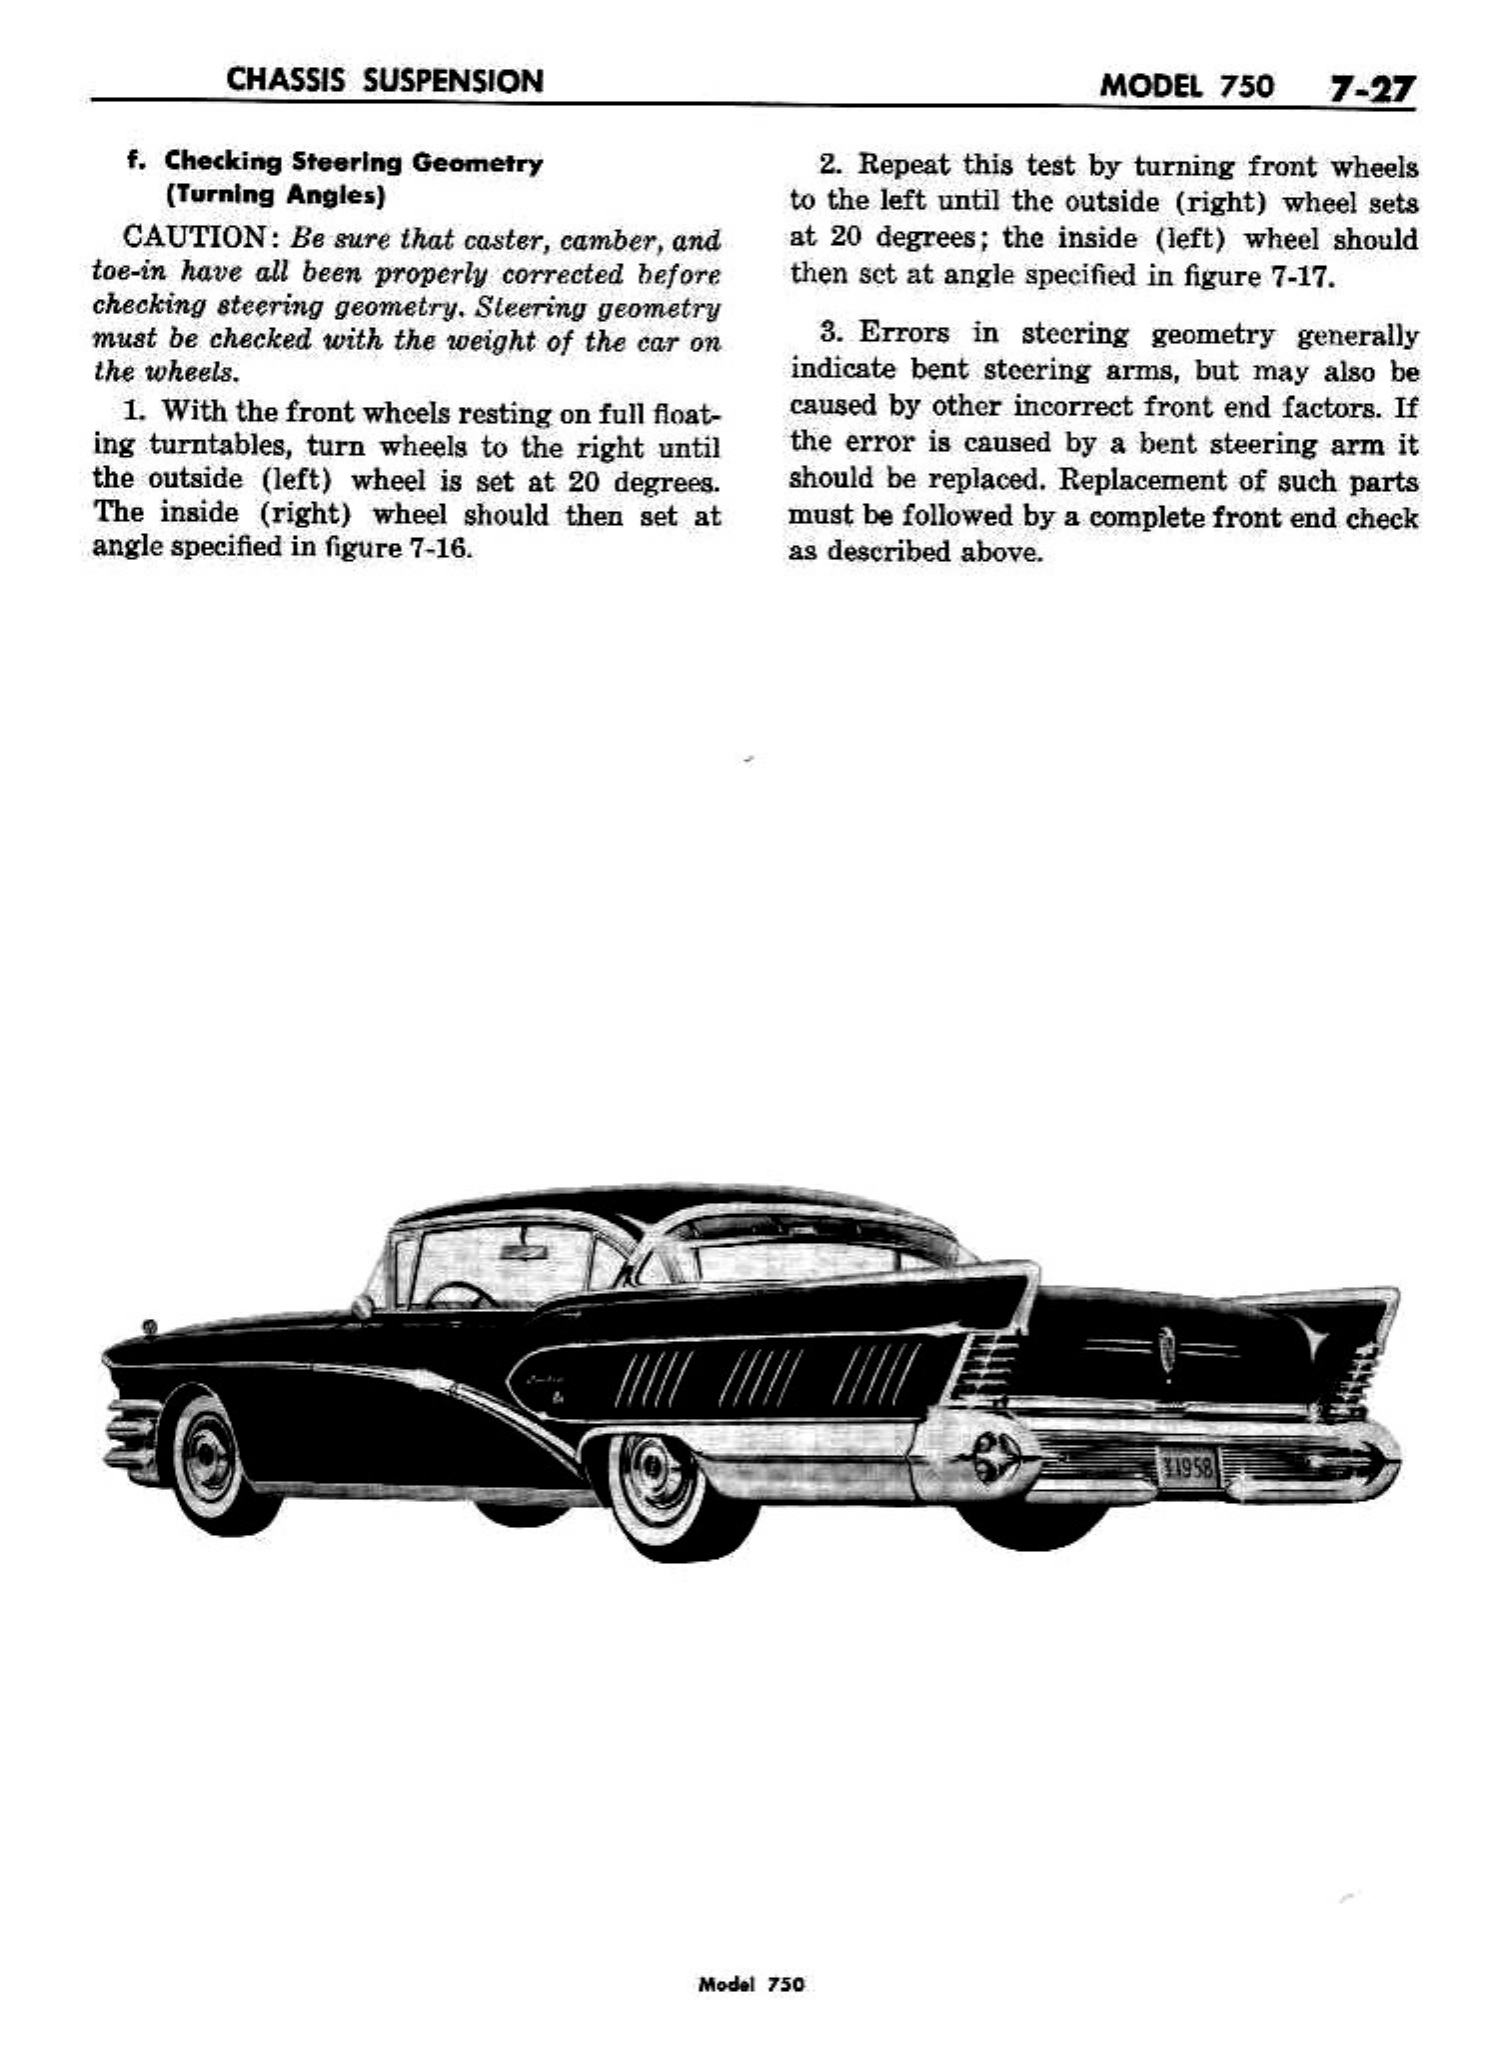 n_08 1958 Buick Shop Manual - Chassis Suspension_27.jpg